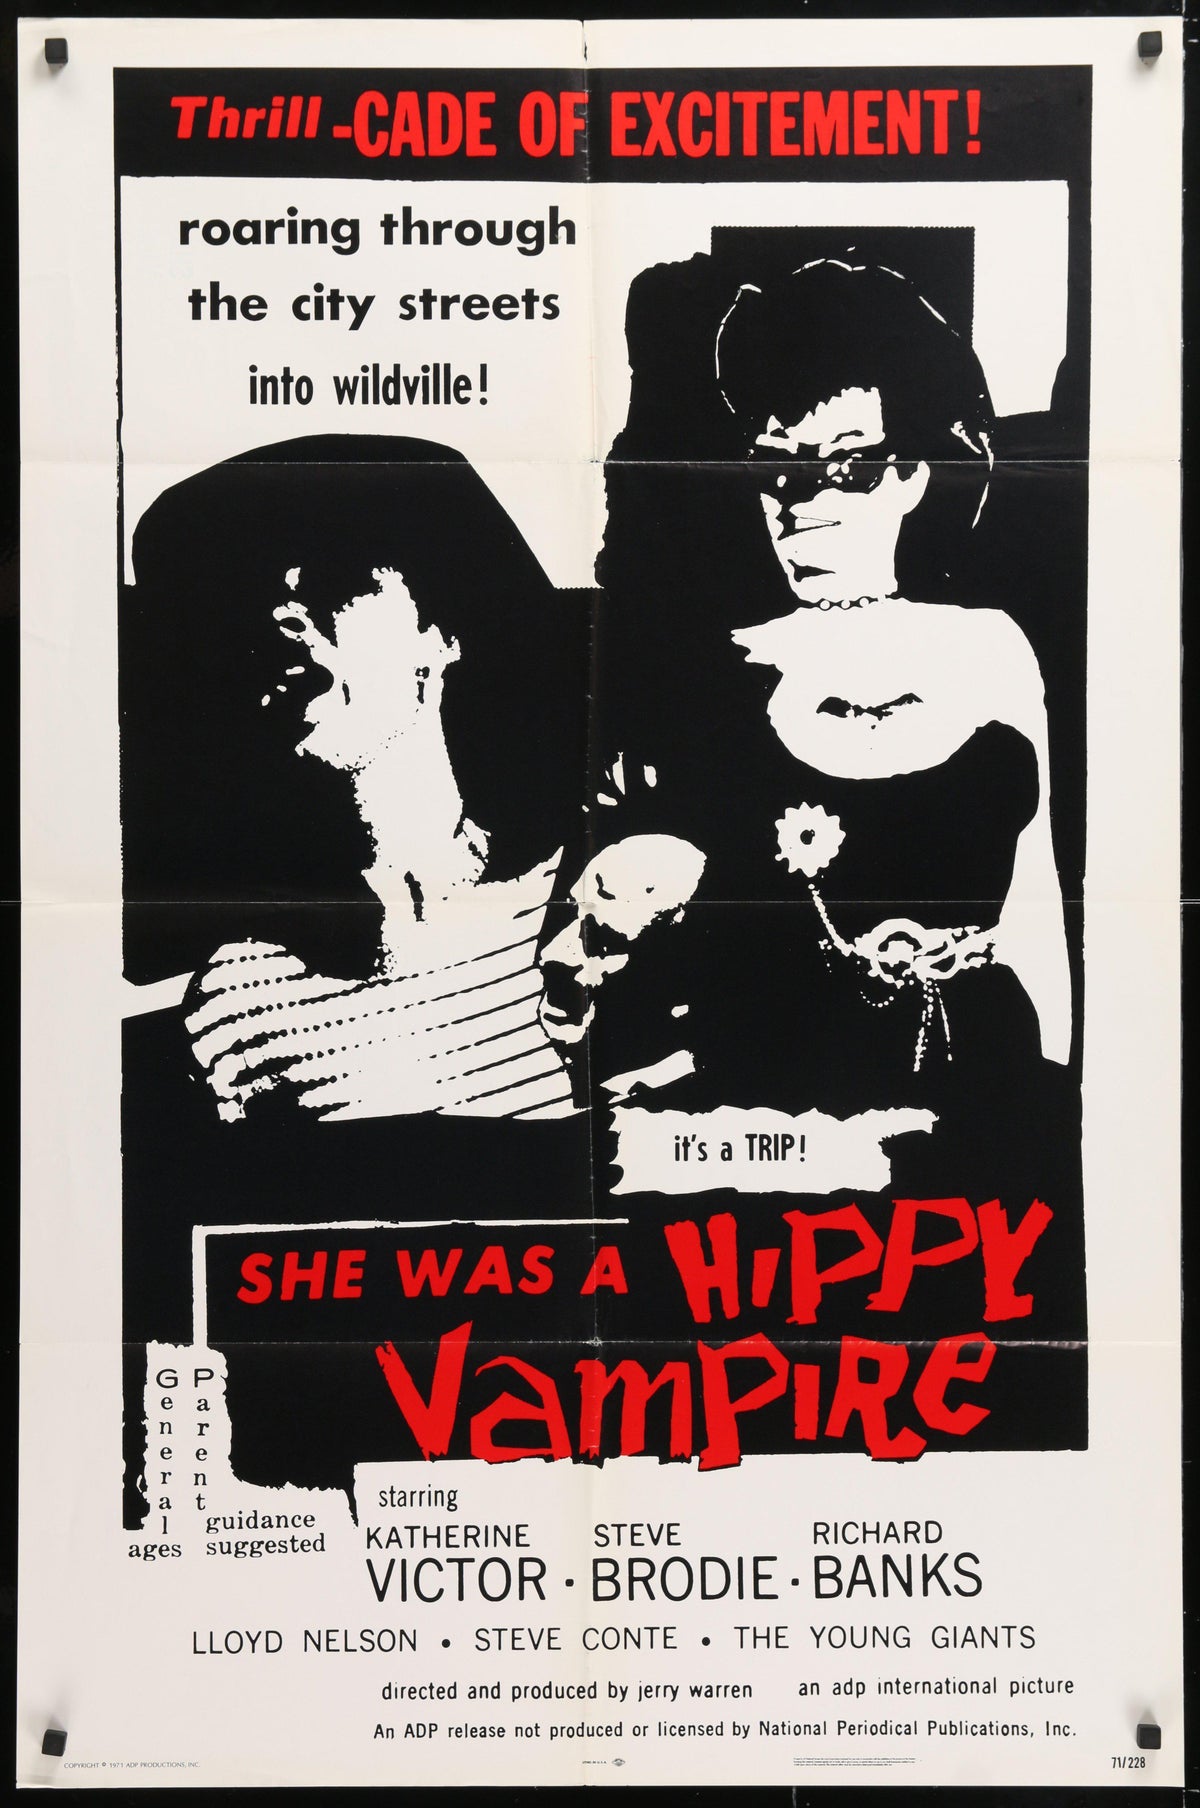 She Was a Hippy Vampire (The Wild World of Batwoman) 1 Sheet (27x41) Original Vintage Movie Poster